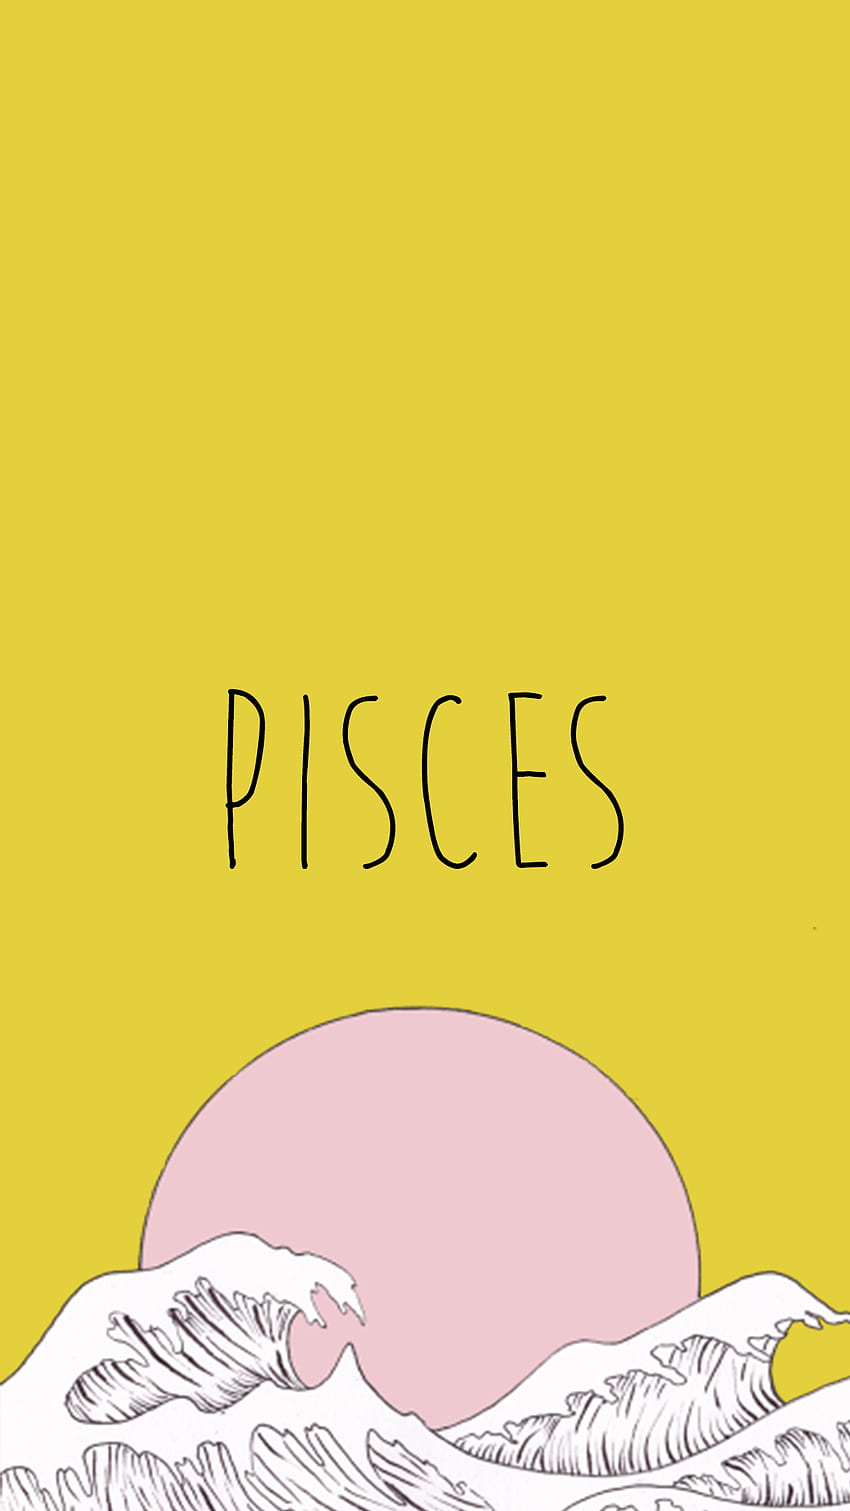 The pisces zodiac sign poster - Pisces